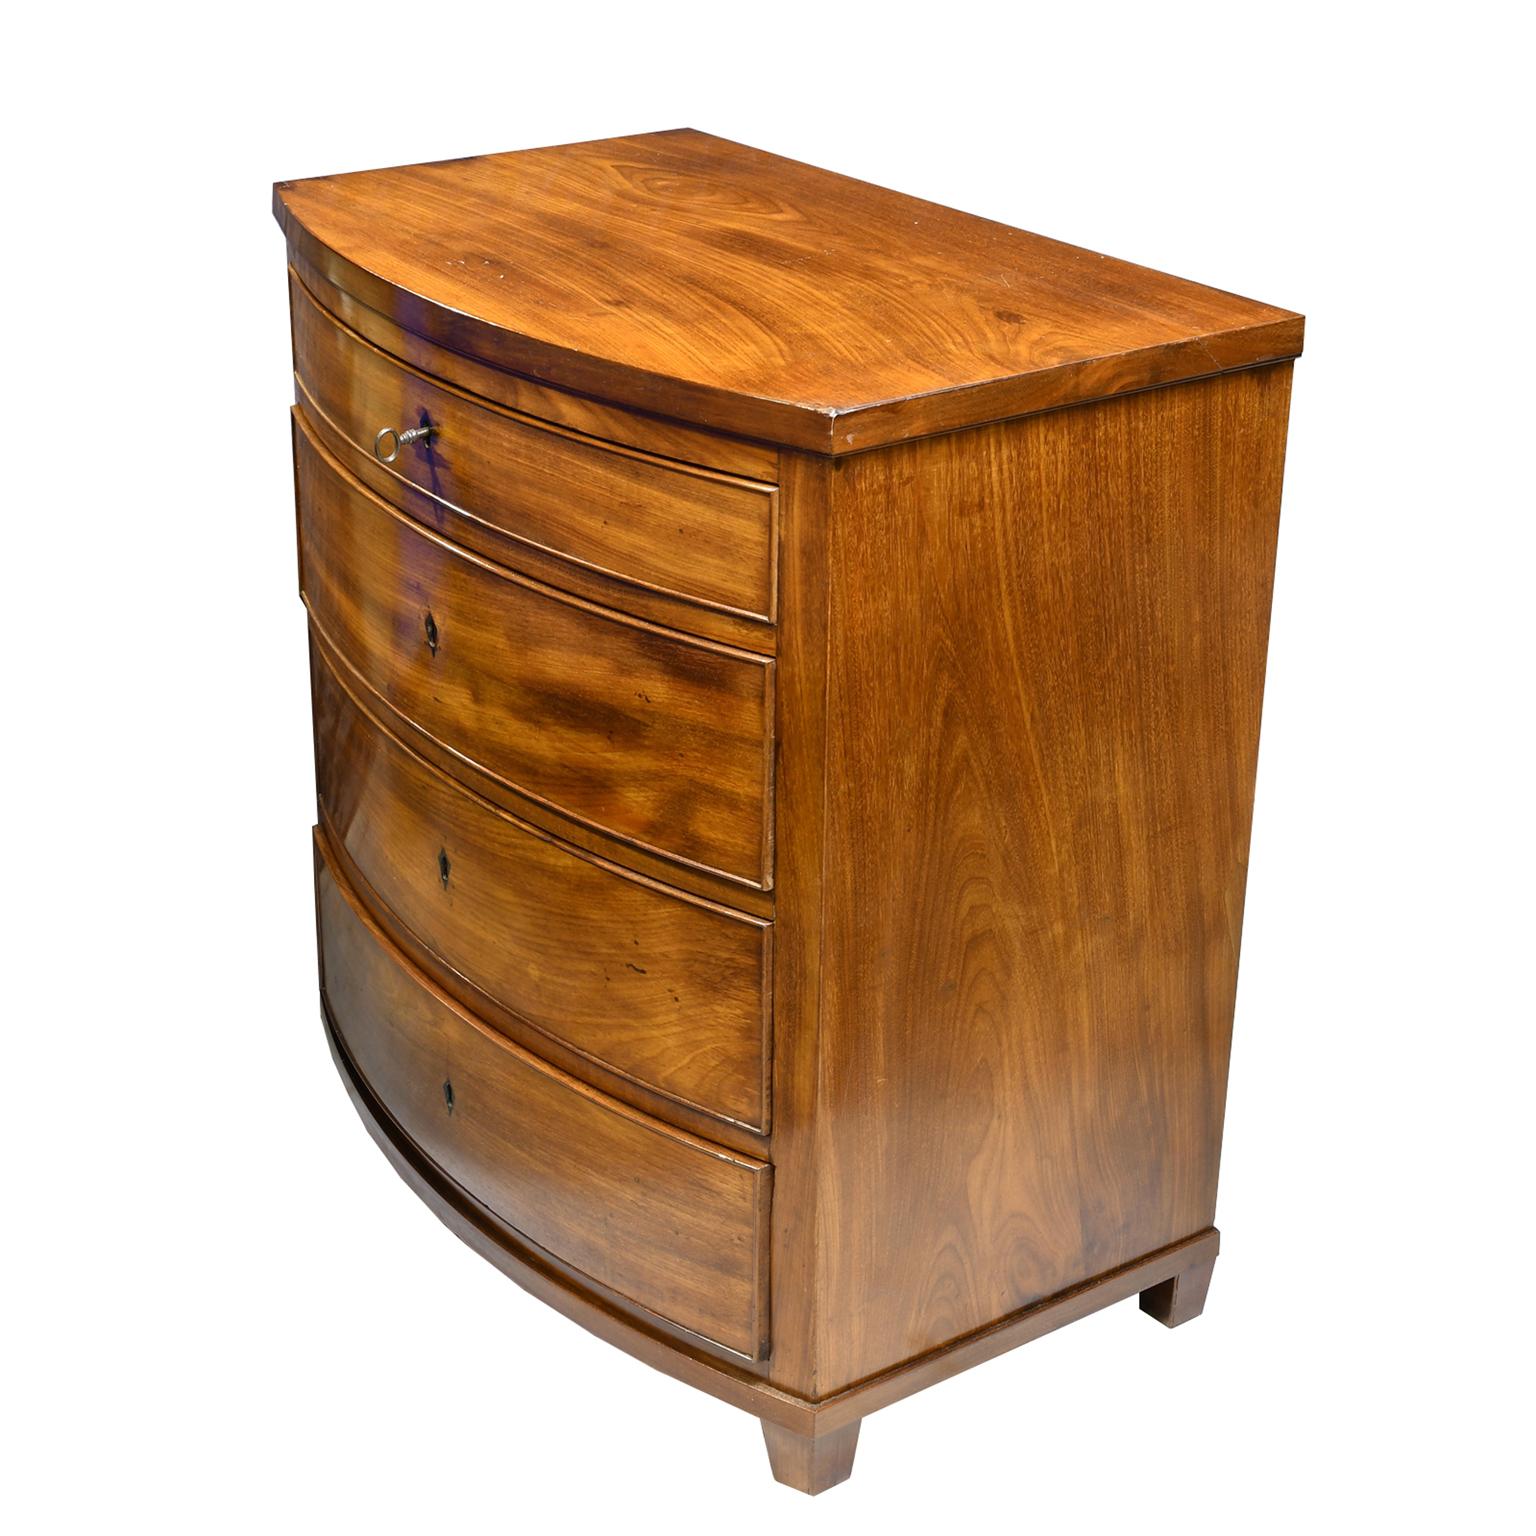 Danish Small Antique Empire Chest of Drawers/Nightstand in West Indies Mahogany, c 1810